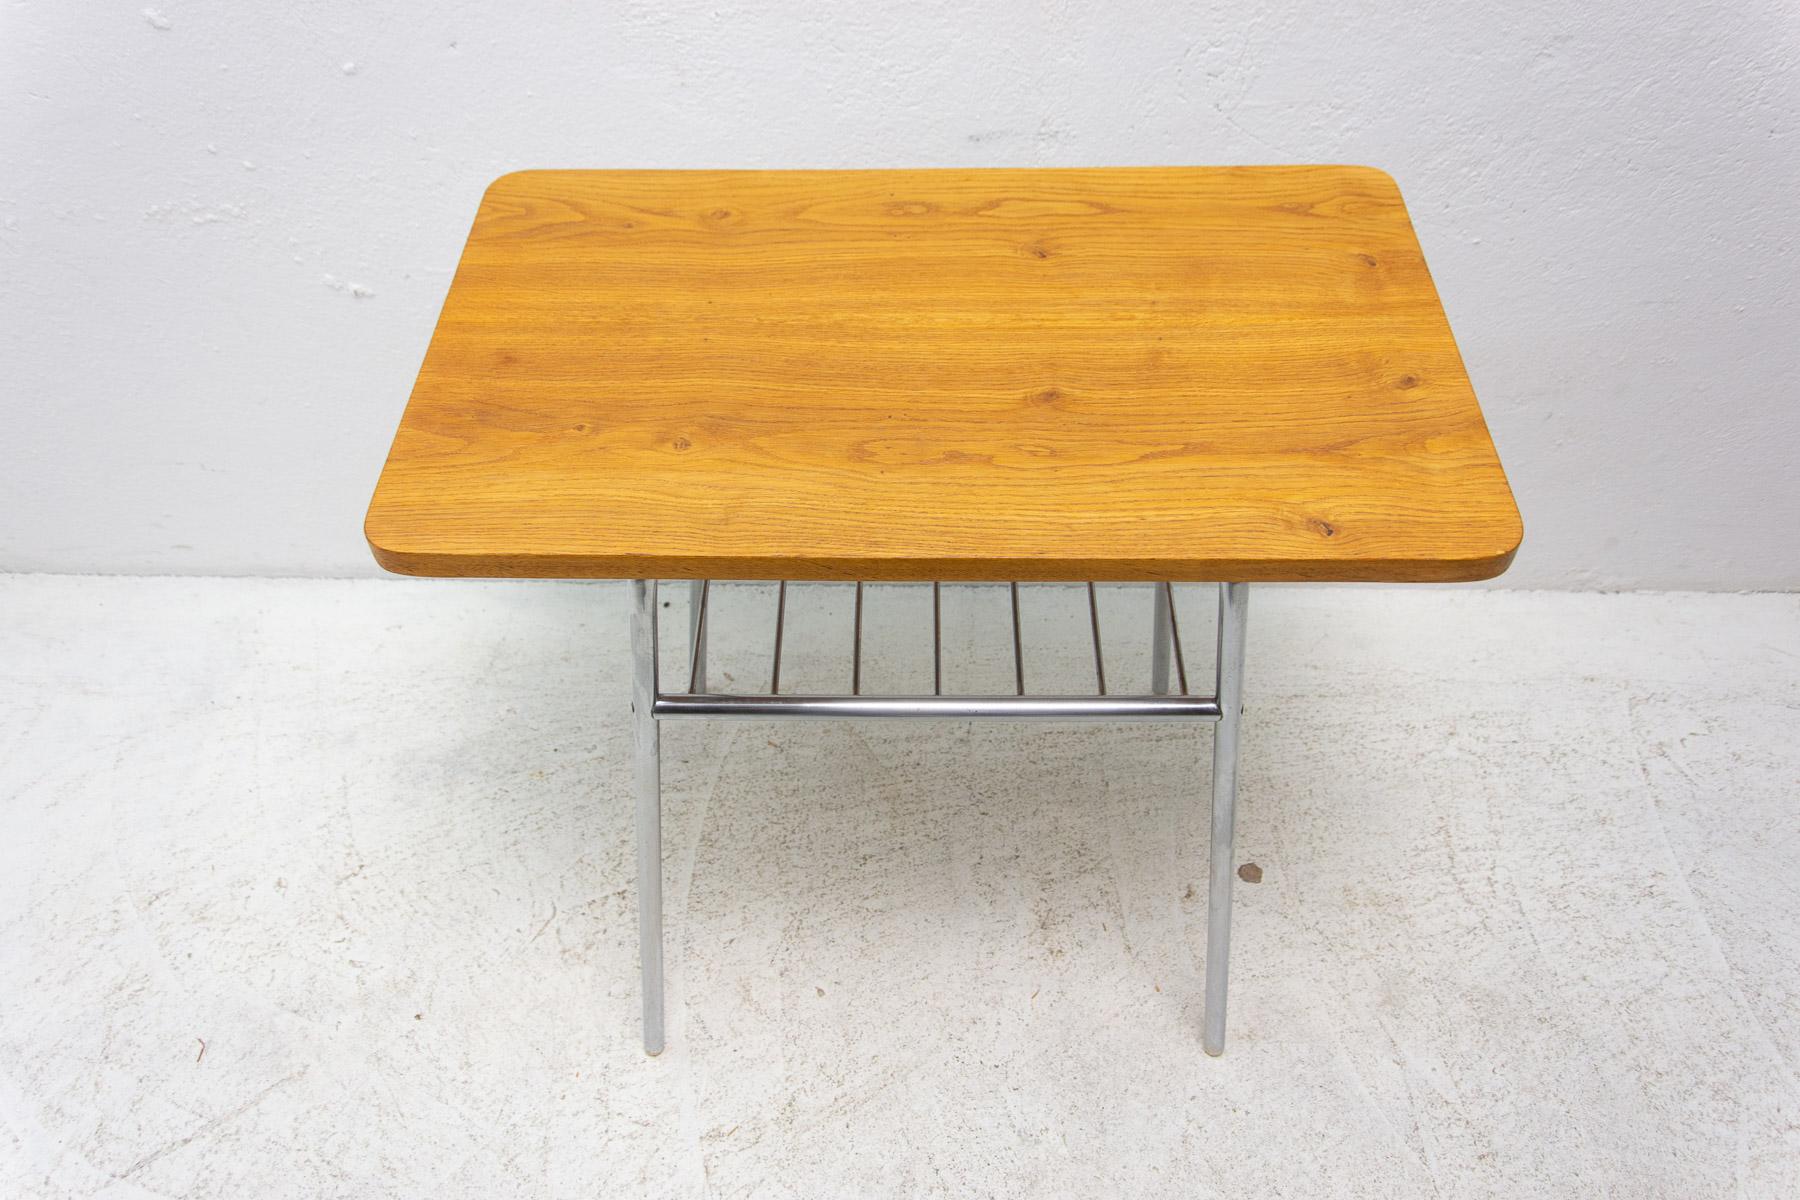 Metal Fully Renovated Chrome and Wood Side Table, 1950s, Czechoslovakia For Sale